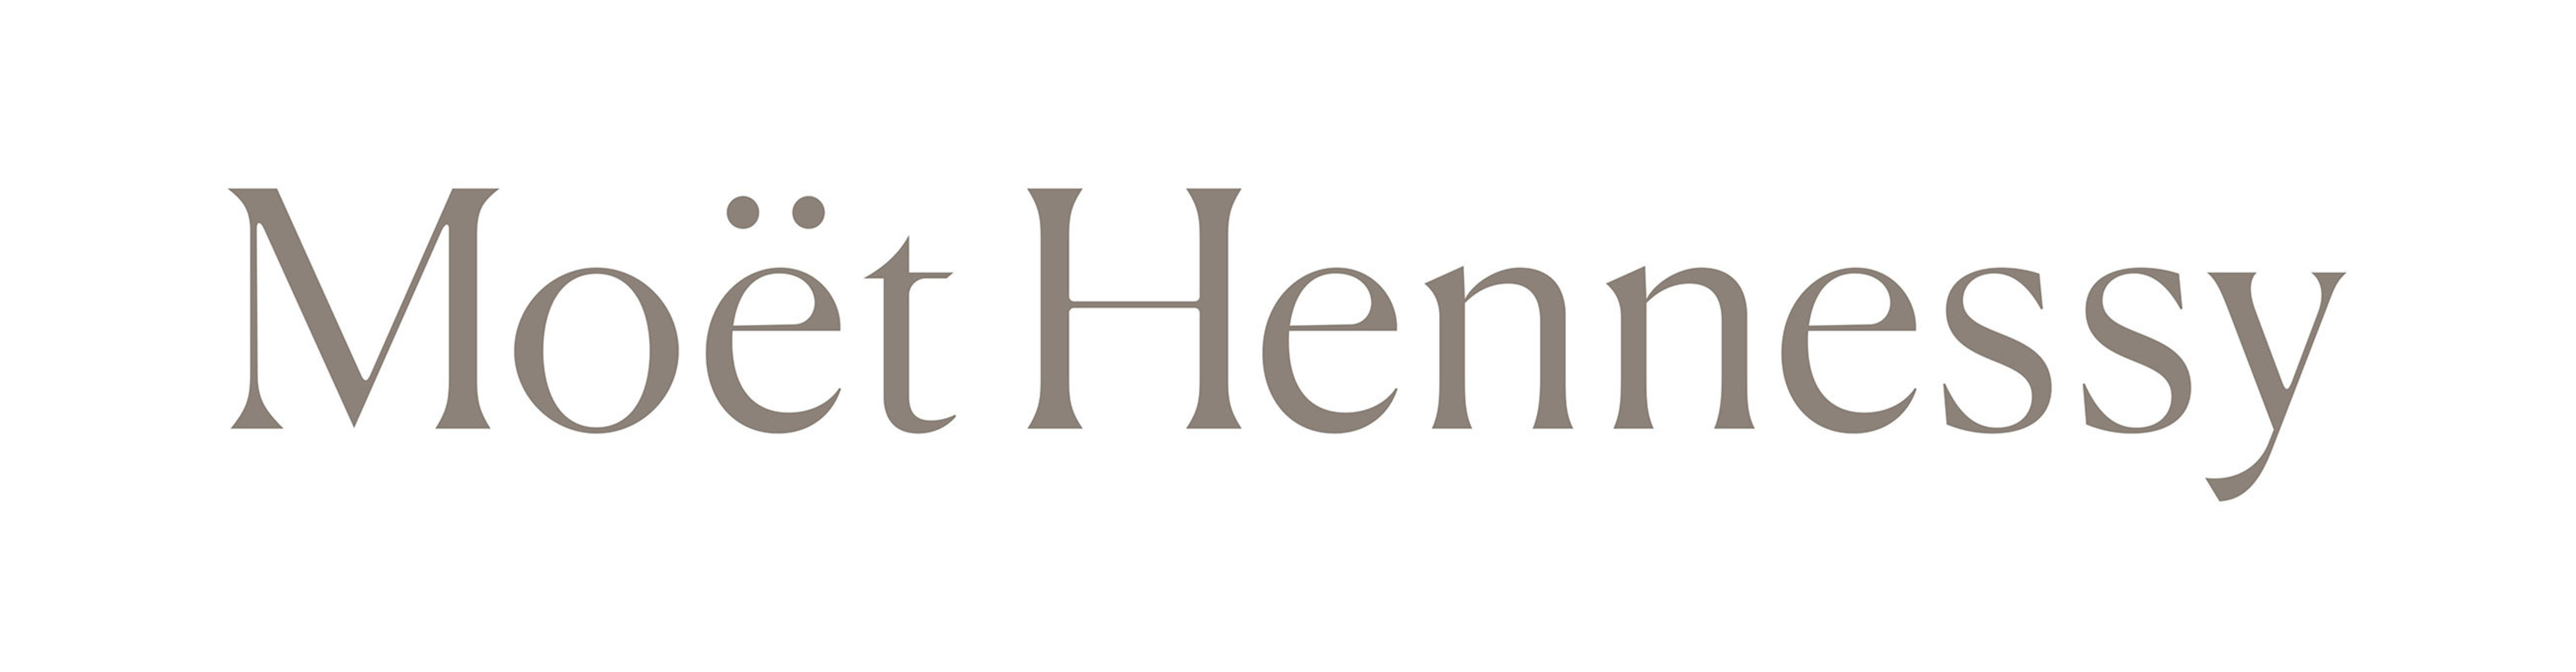 MOET HENNESSY APPOINTS A NEW VP COMMUNICATION